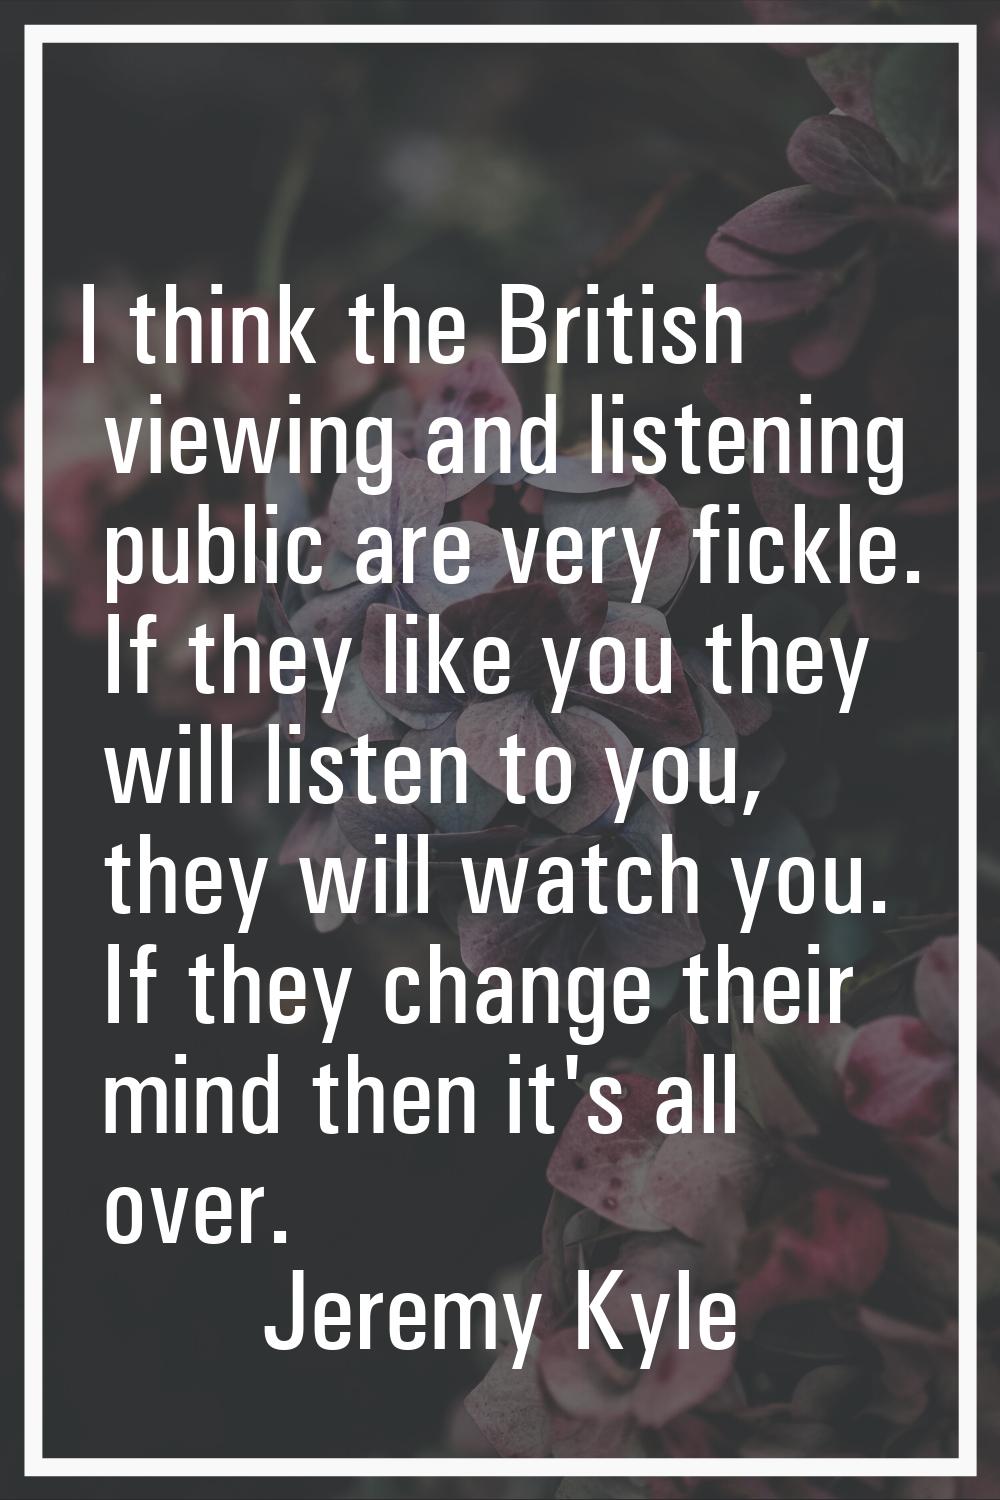 I think the British viewing and listening public are very fickle. If they like you they will listen